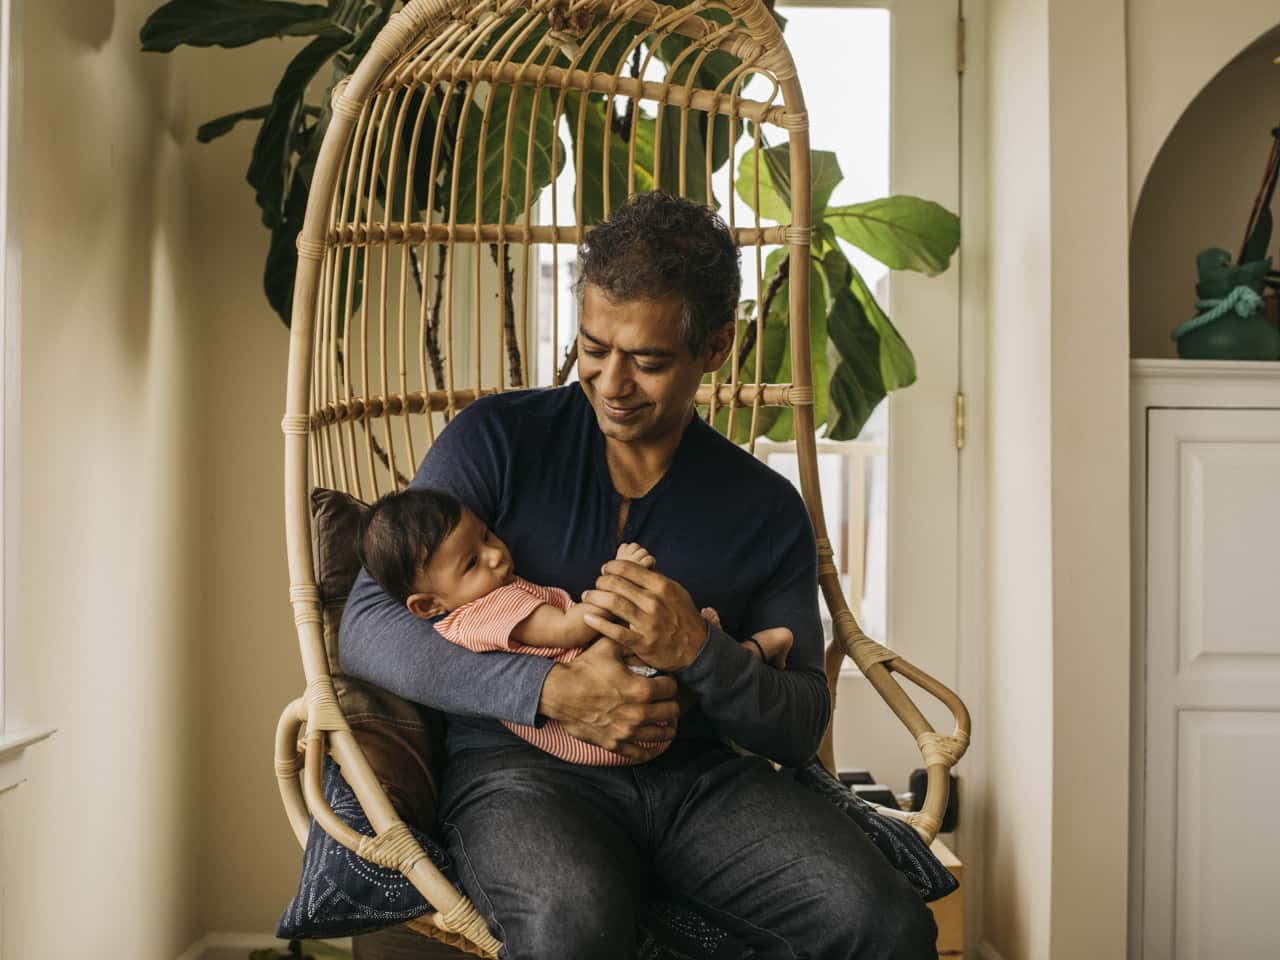 Image of Naval Ravikant with his son, Neo